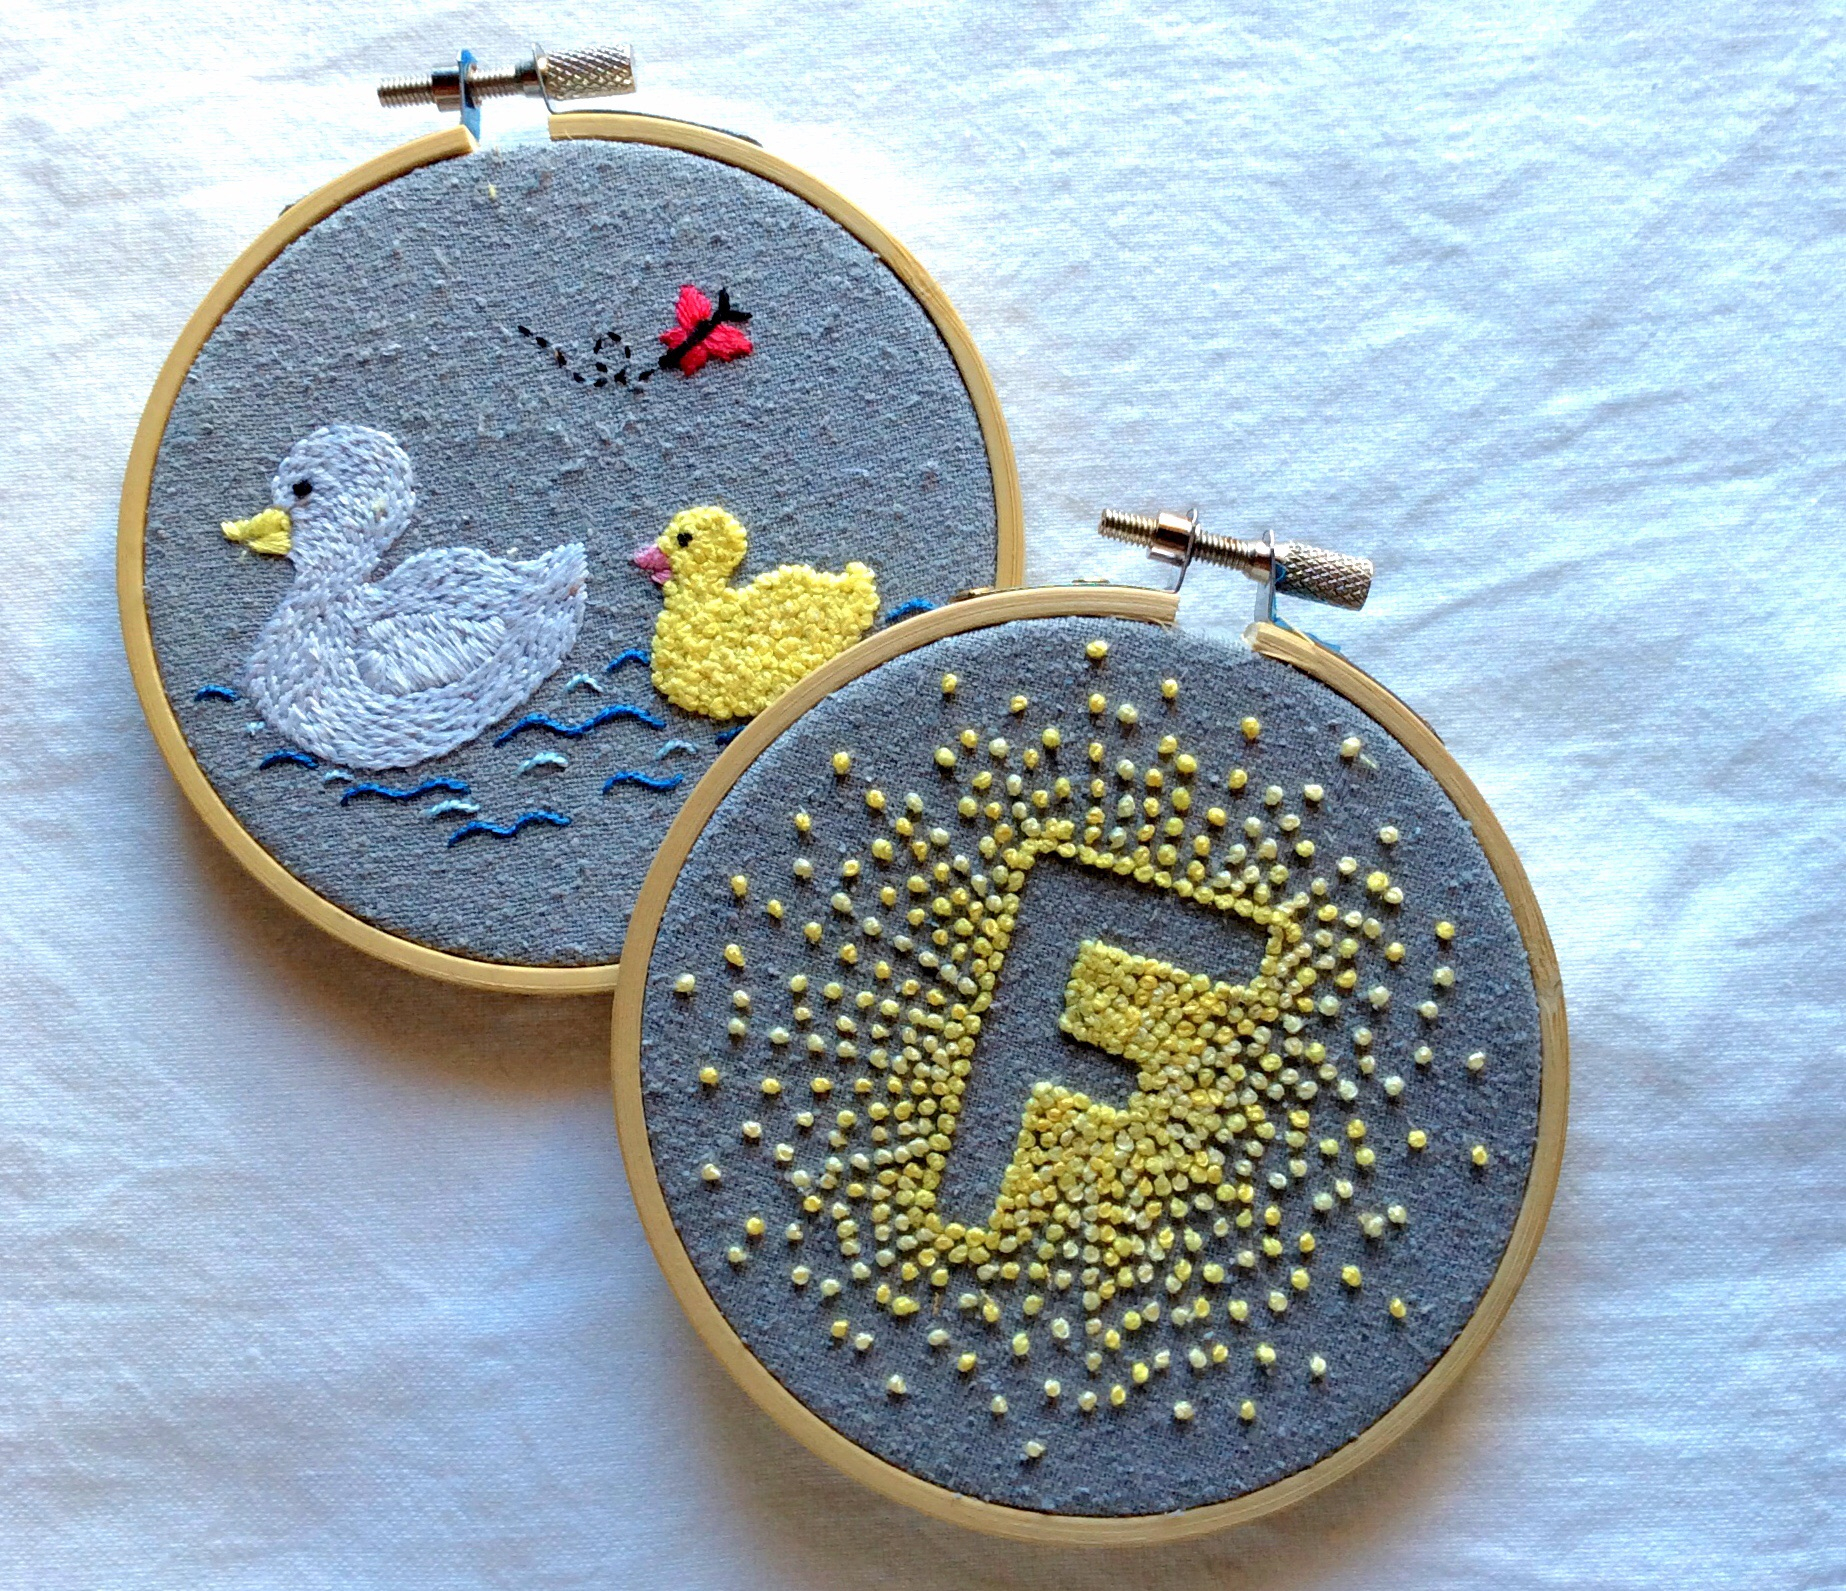 French Knots Embroidery Patterns A Project That Will Make You Love French Knots Ambrosia Stitches